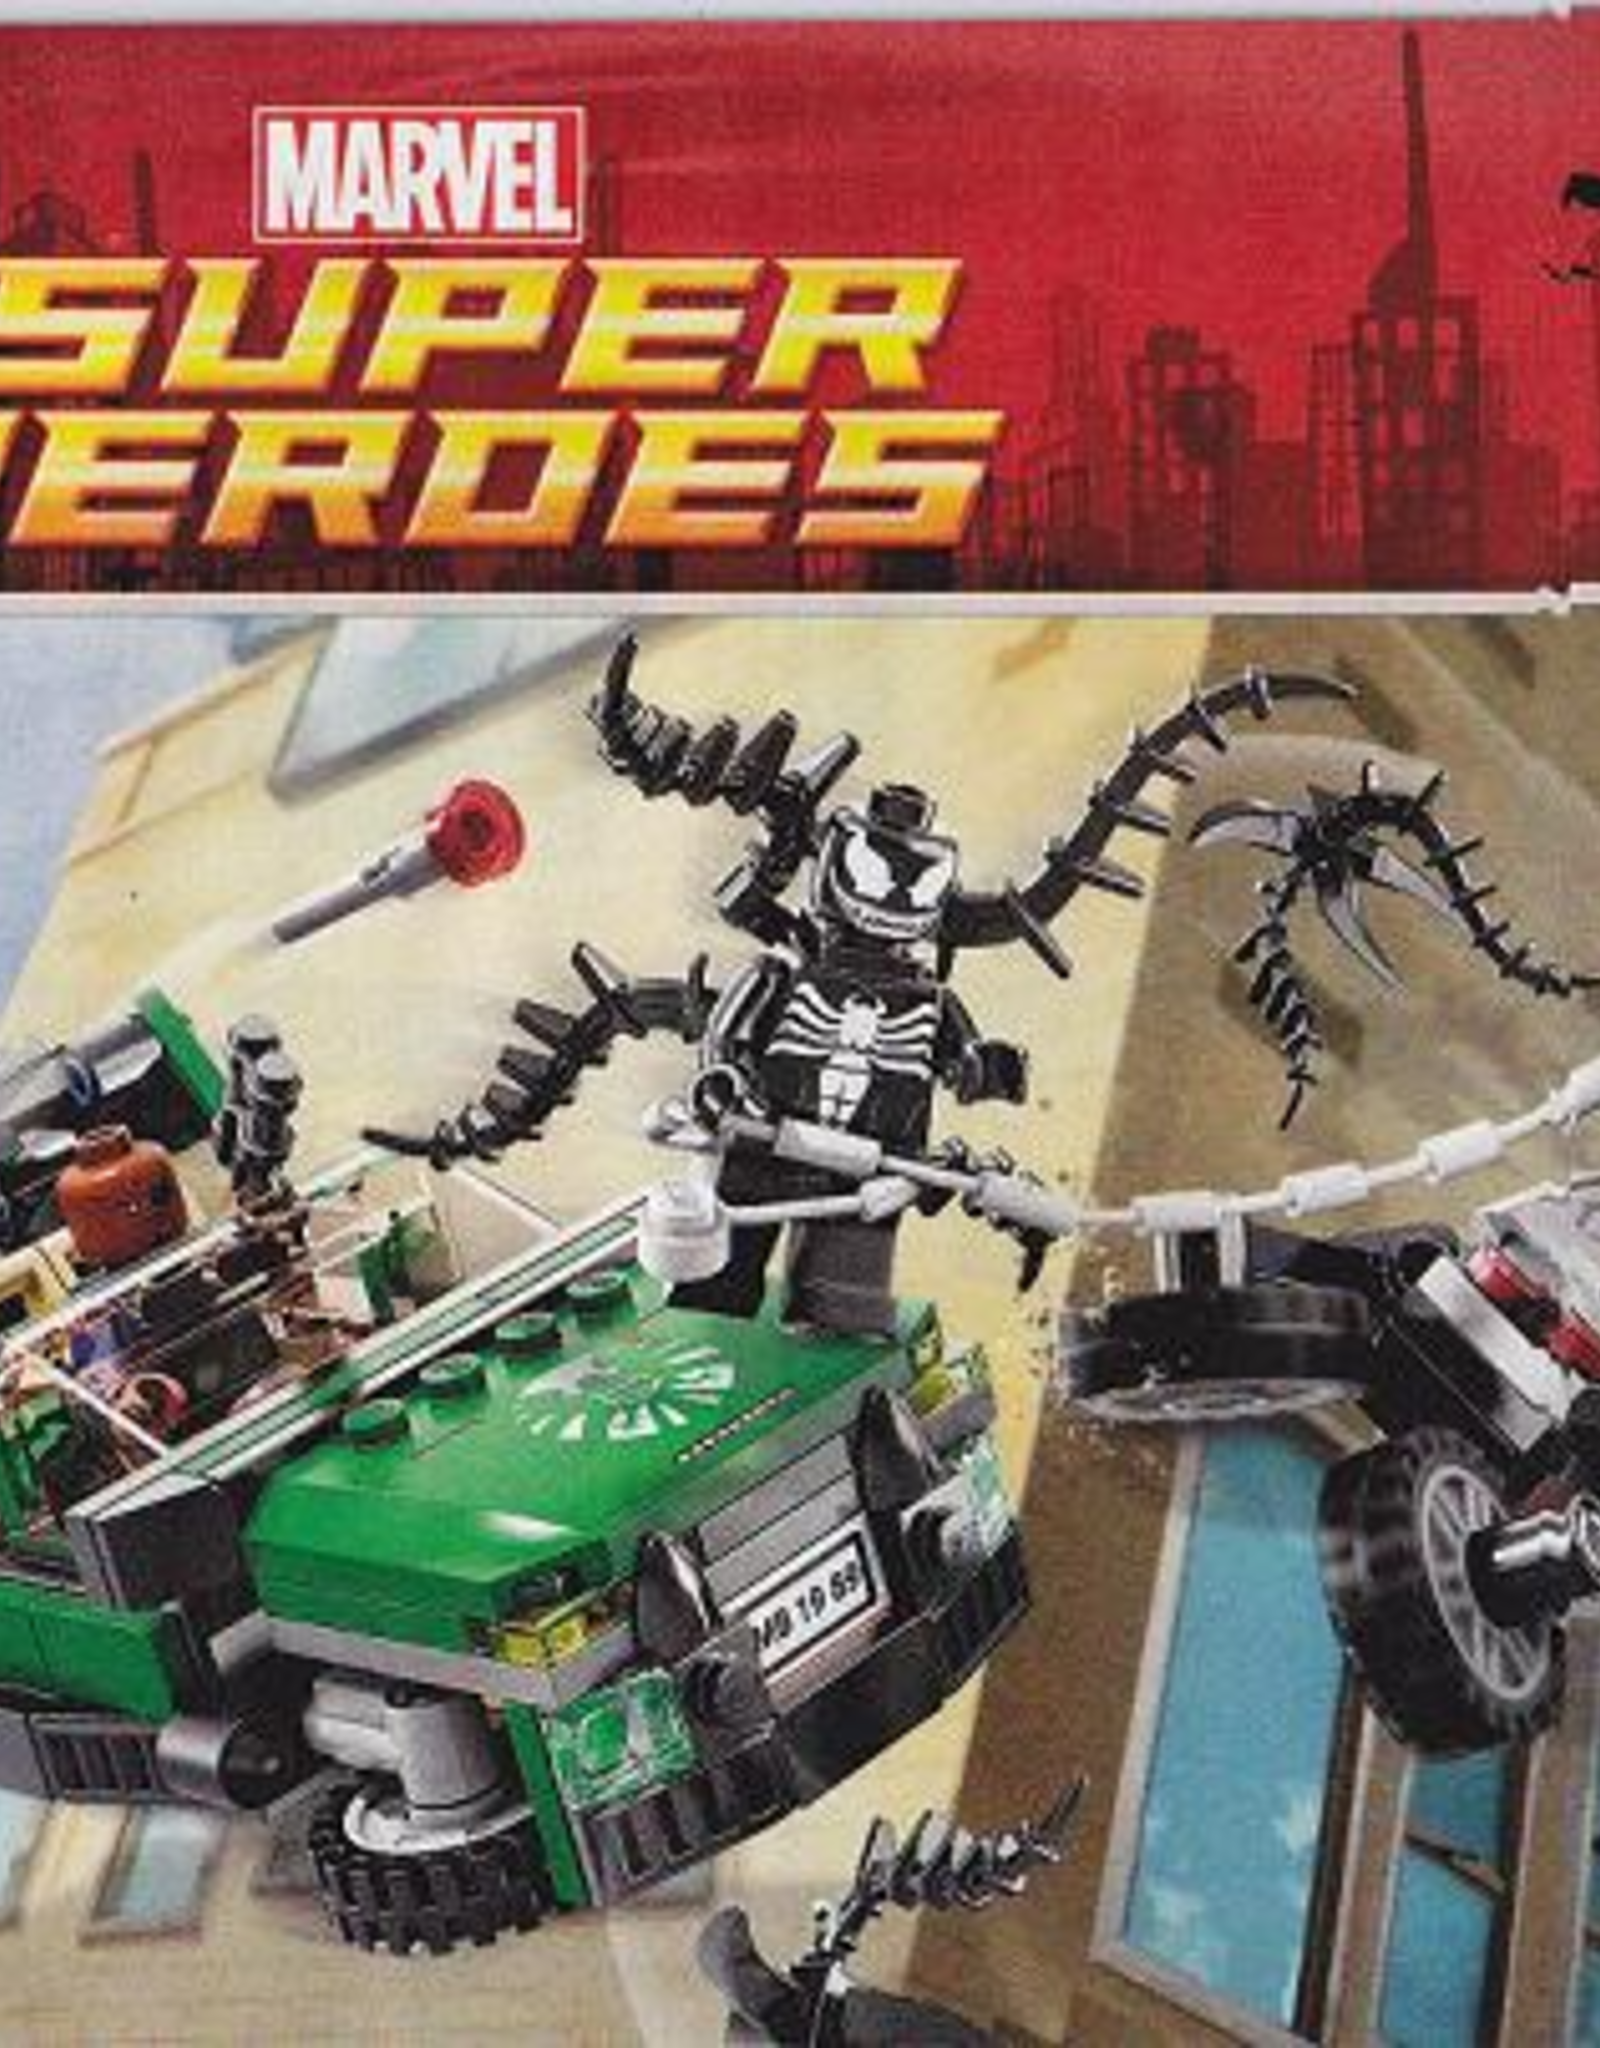 LEGO LEGO 76004 Spider-Man: Spider-Cycle Chase SUPER HEROES